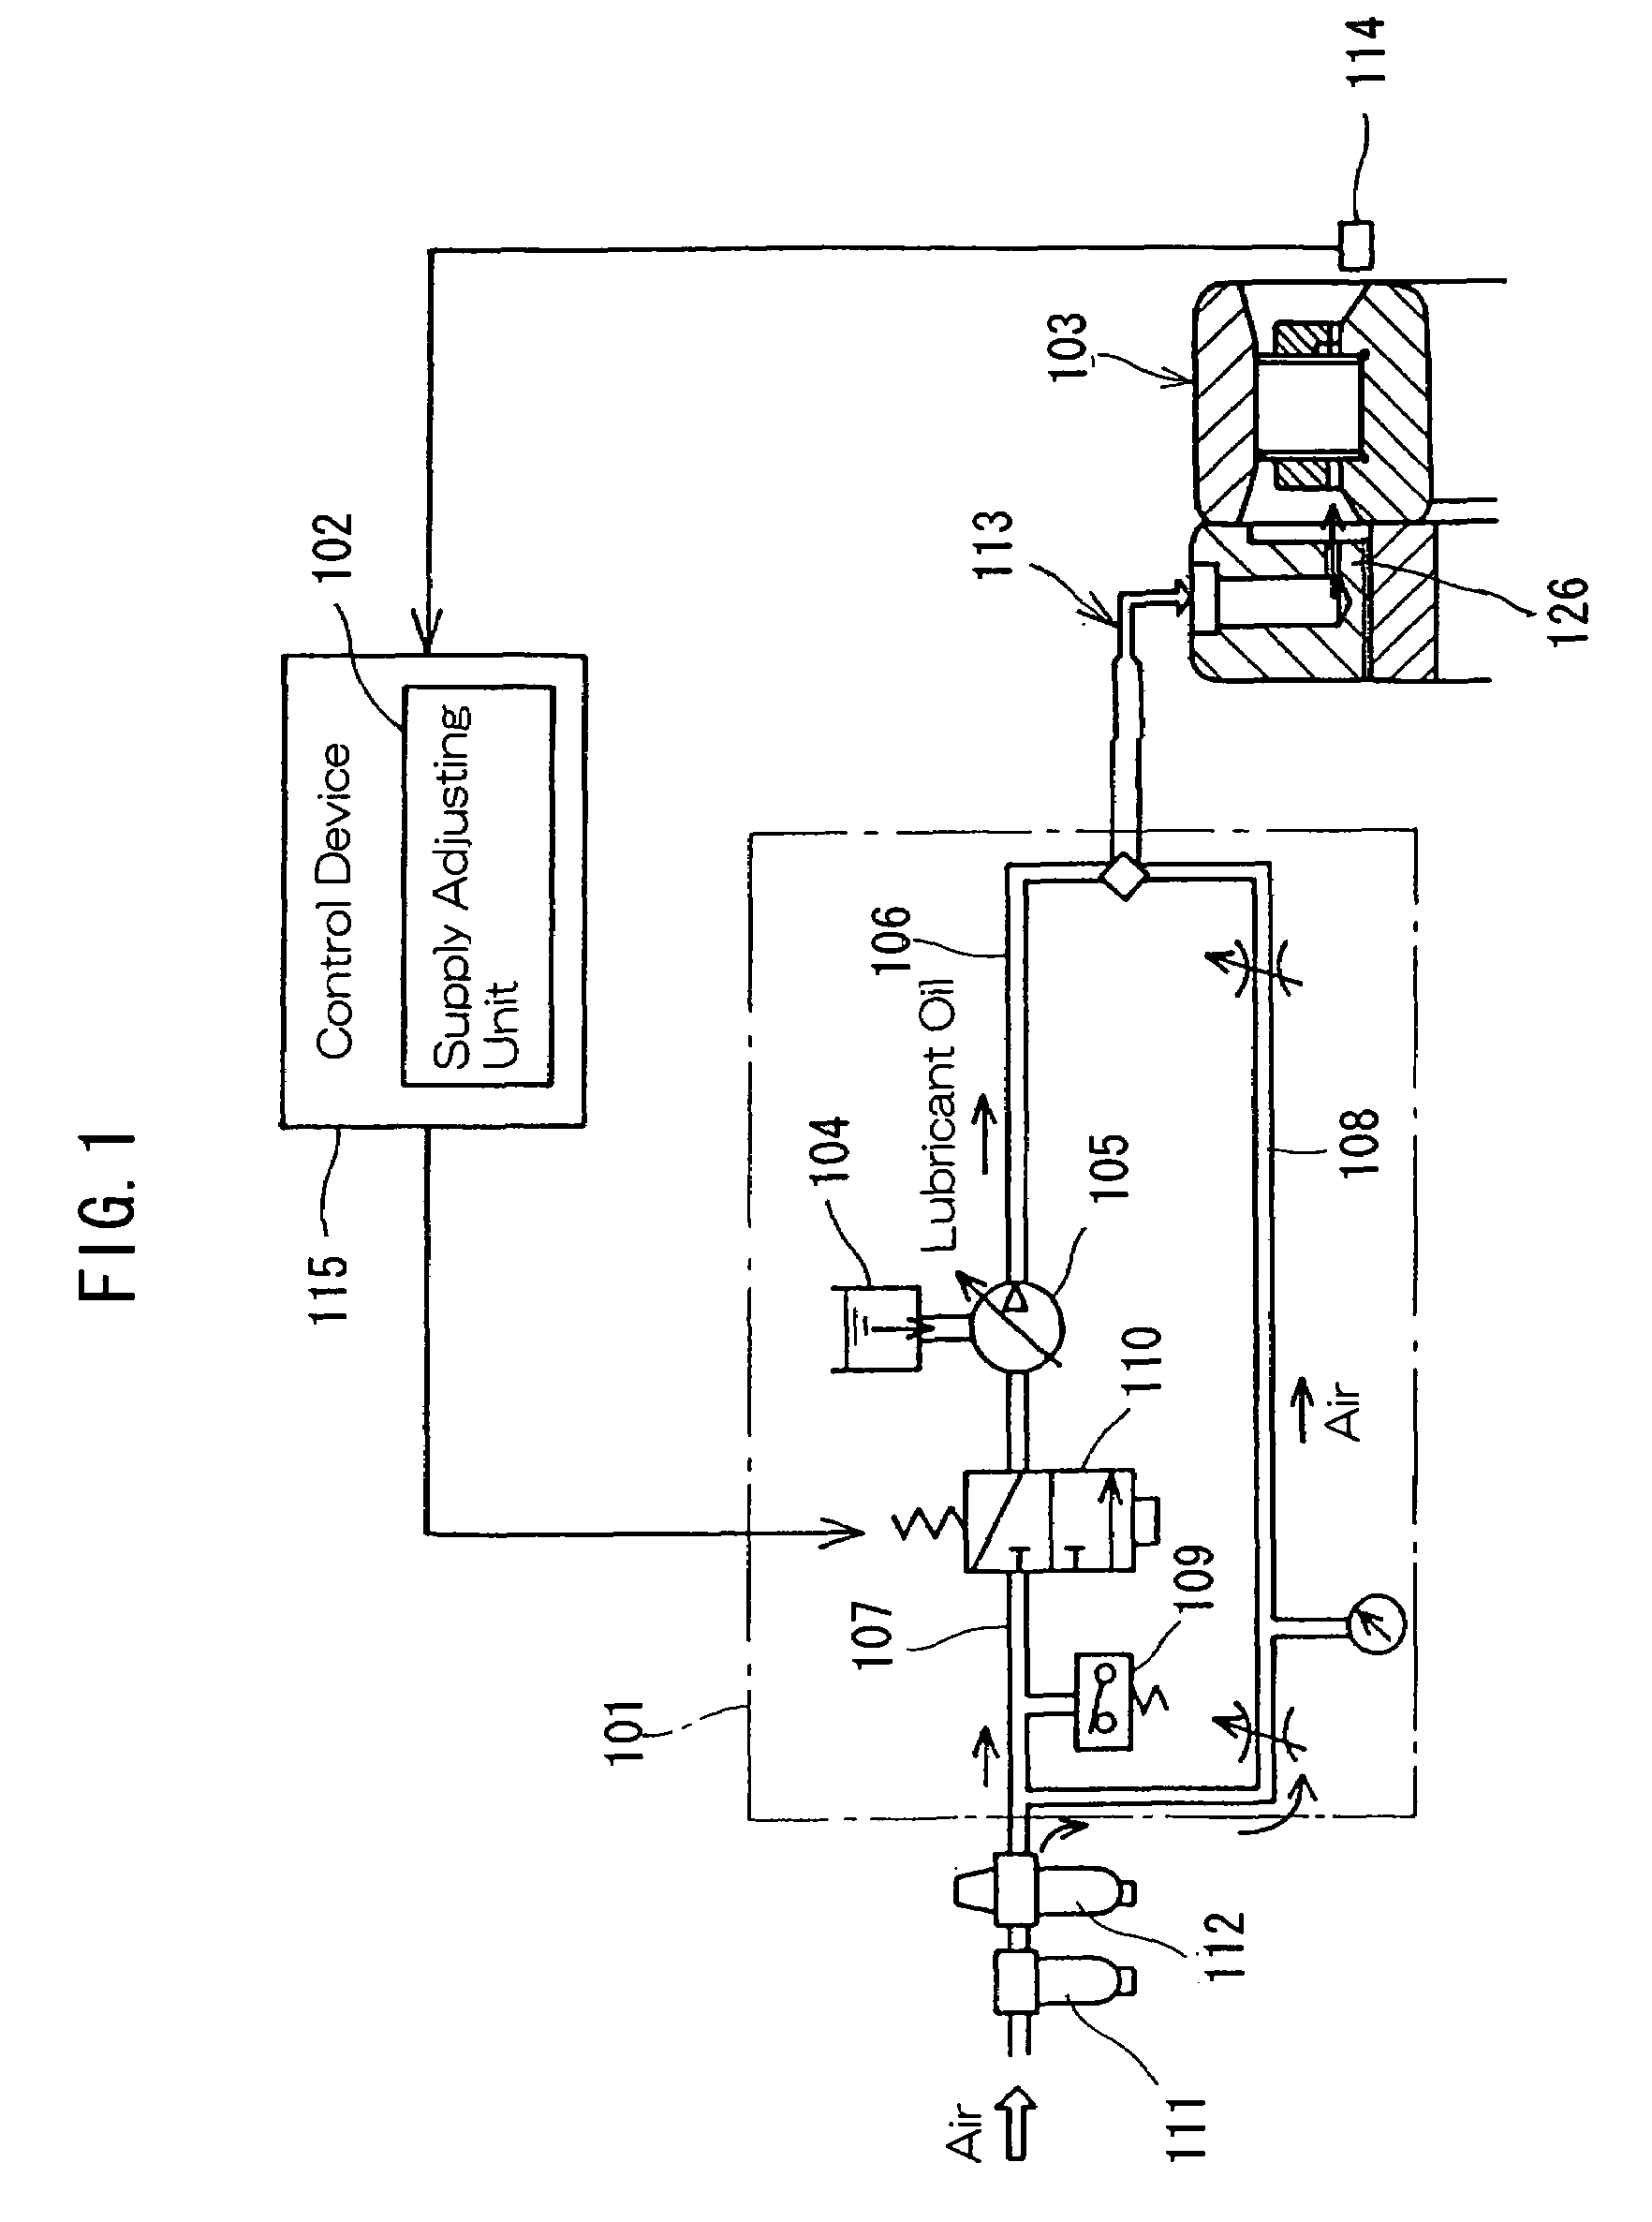 Method of and device for lubricating rolling bearings